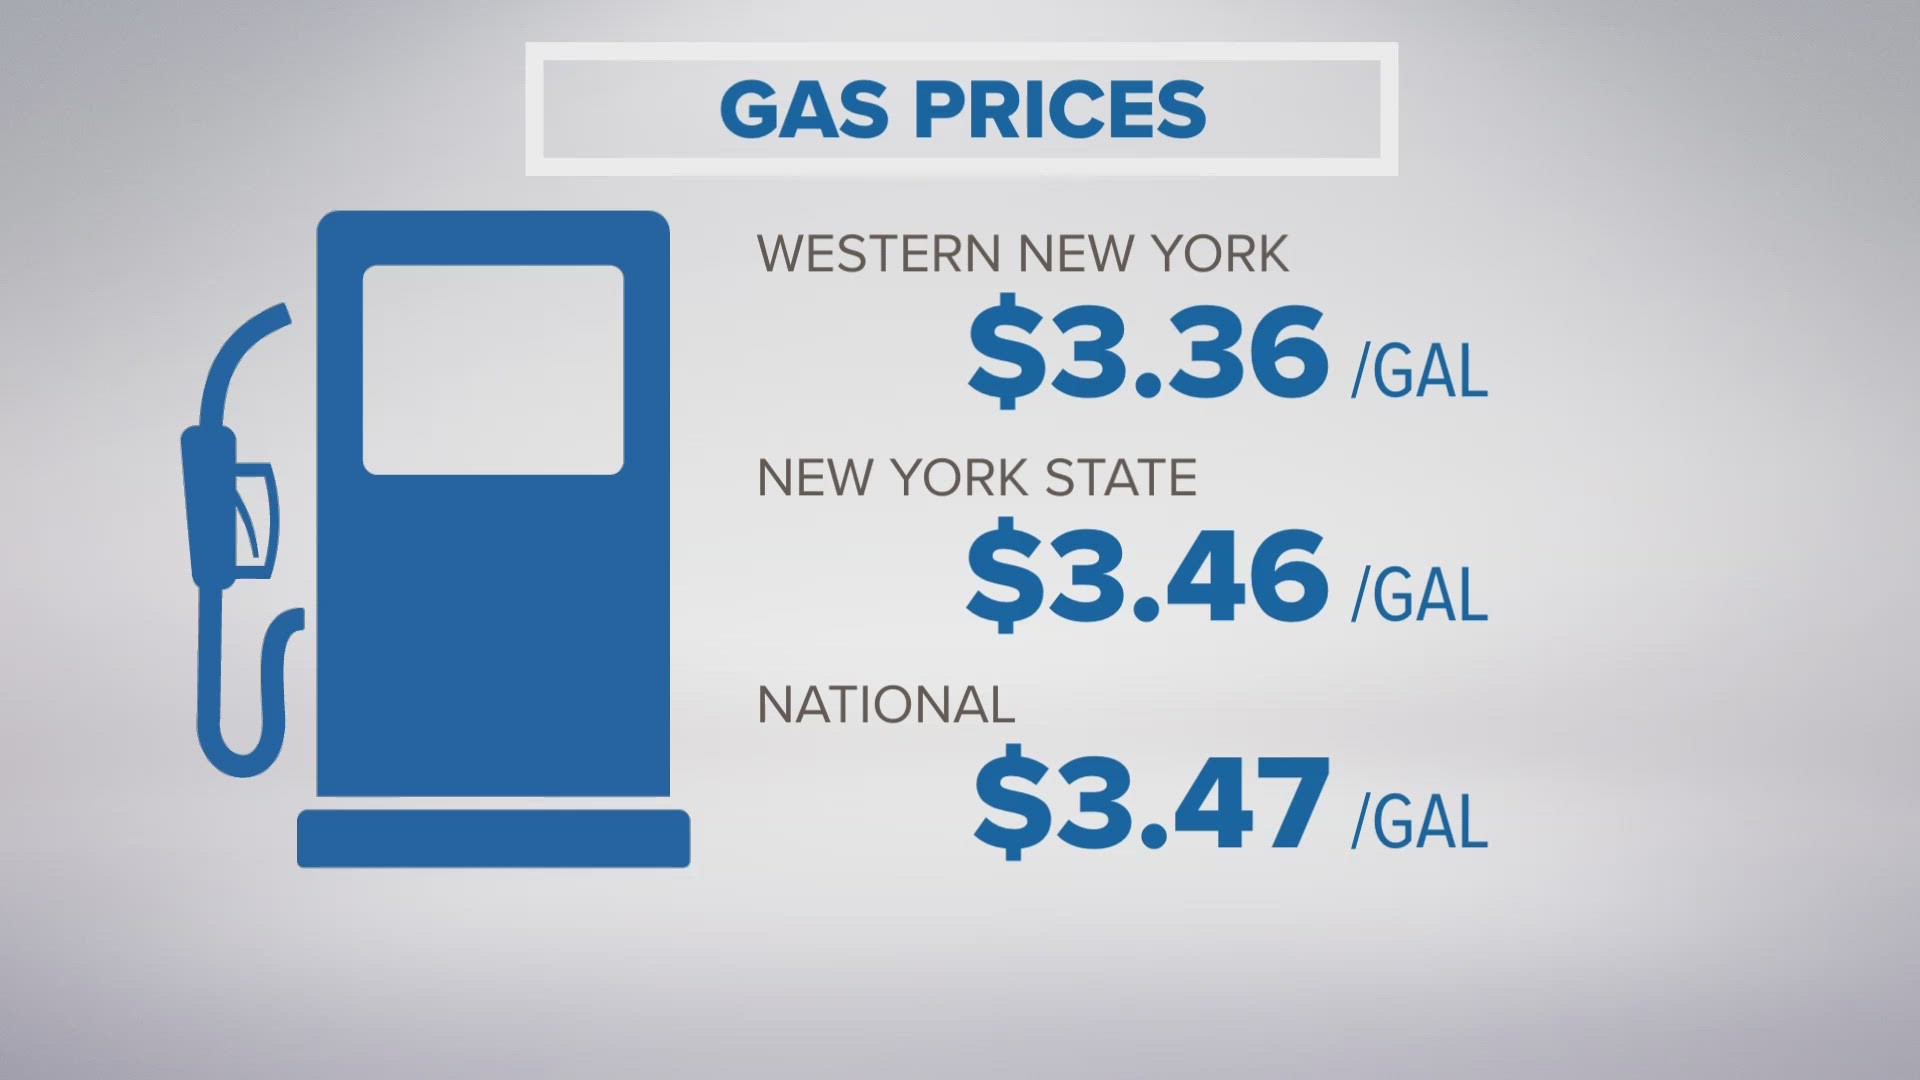 western new york have stayed steady since last monday, while the national average has increased by six cents.